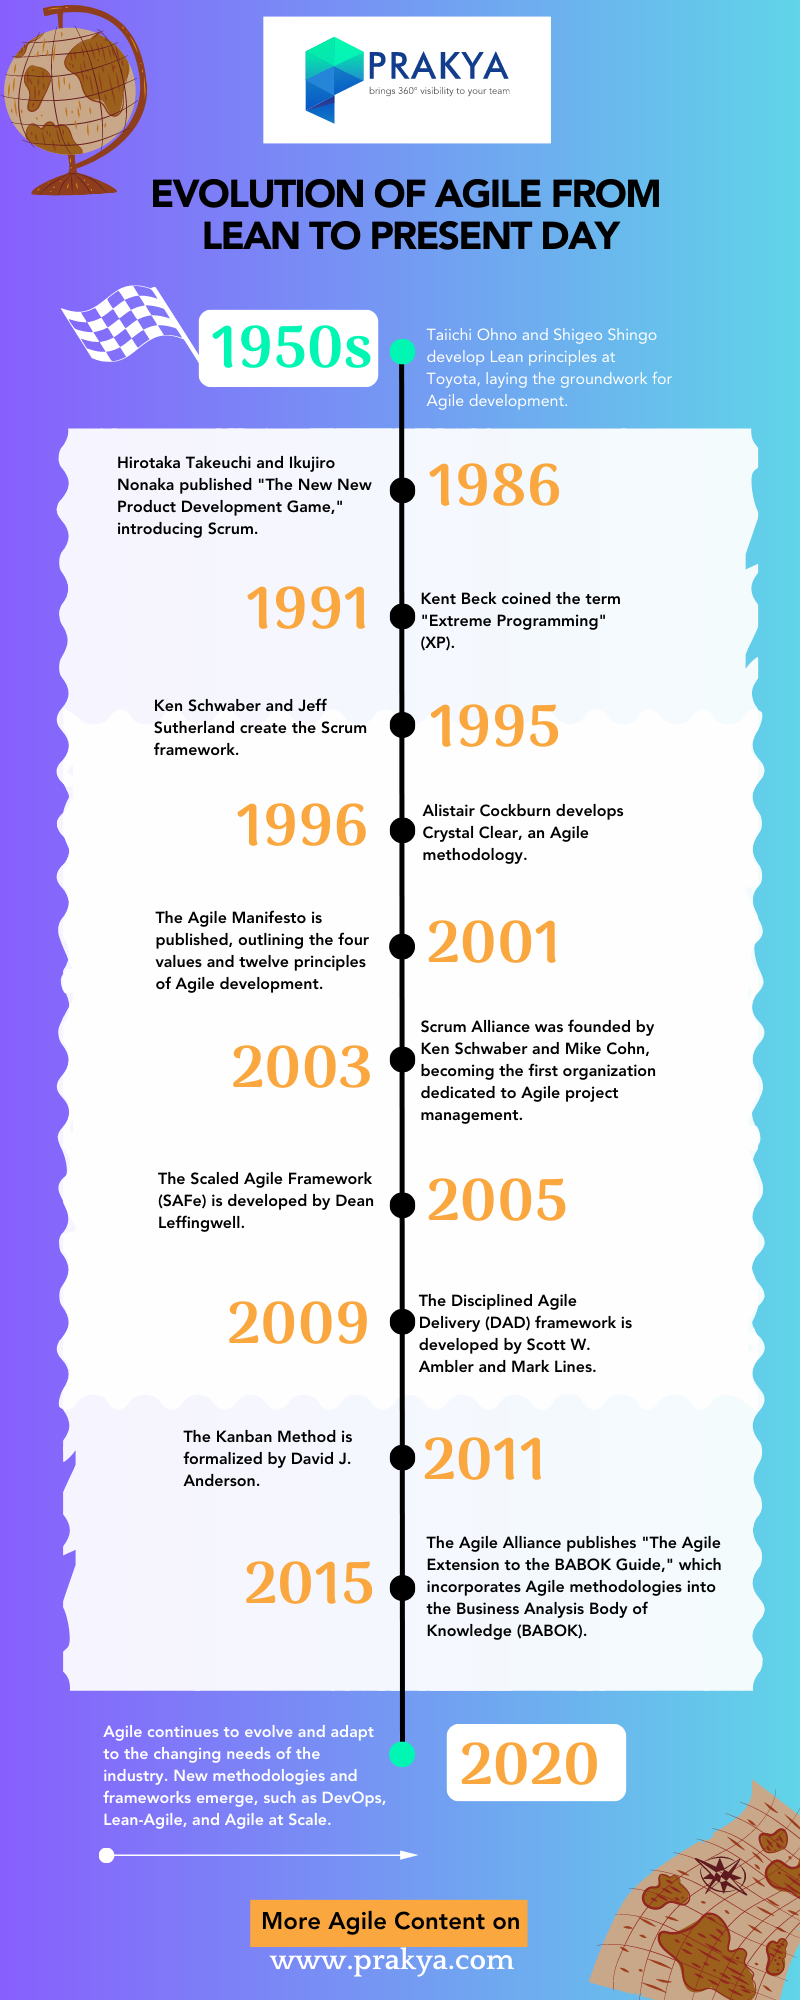 This infographic by Prakya is about the evolution of Agile from Lean to Agile till the year 2020